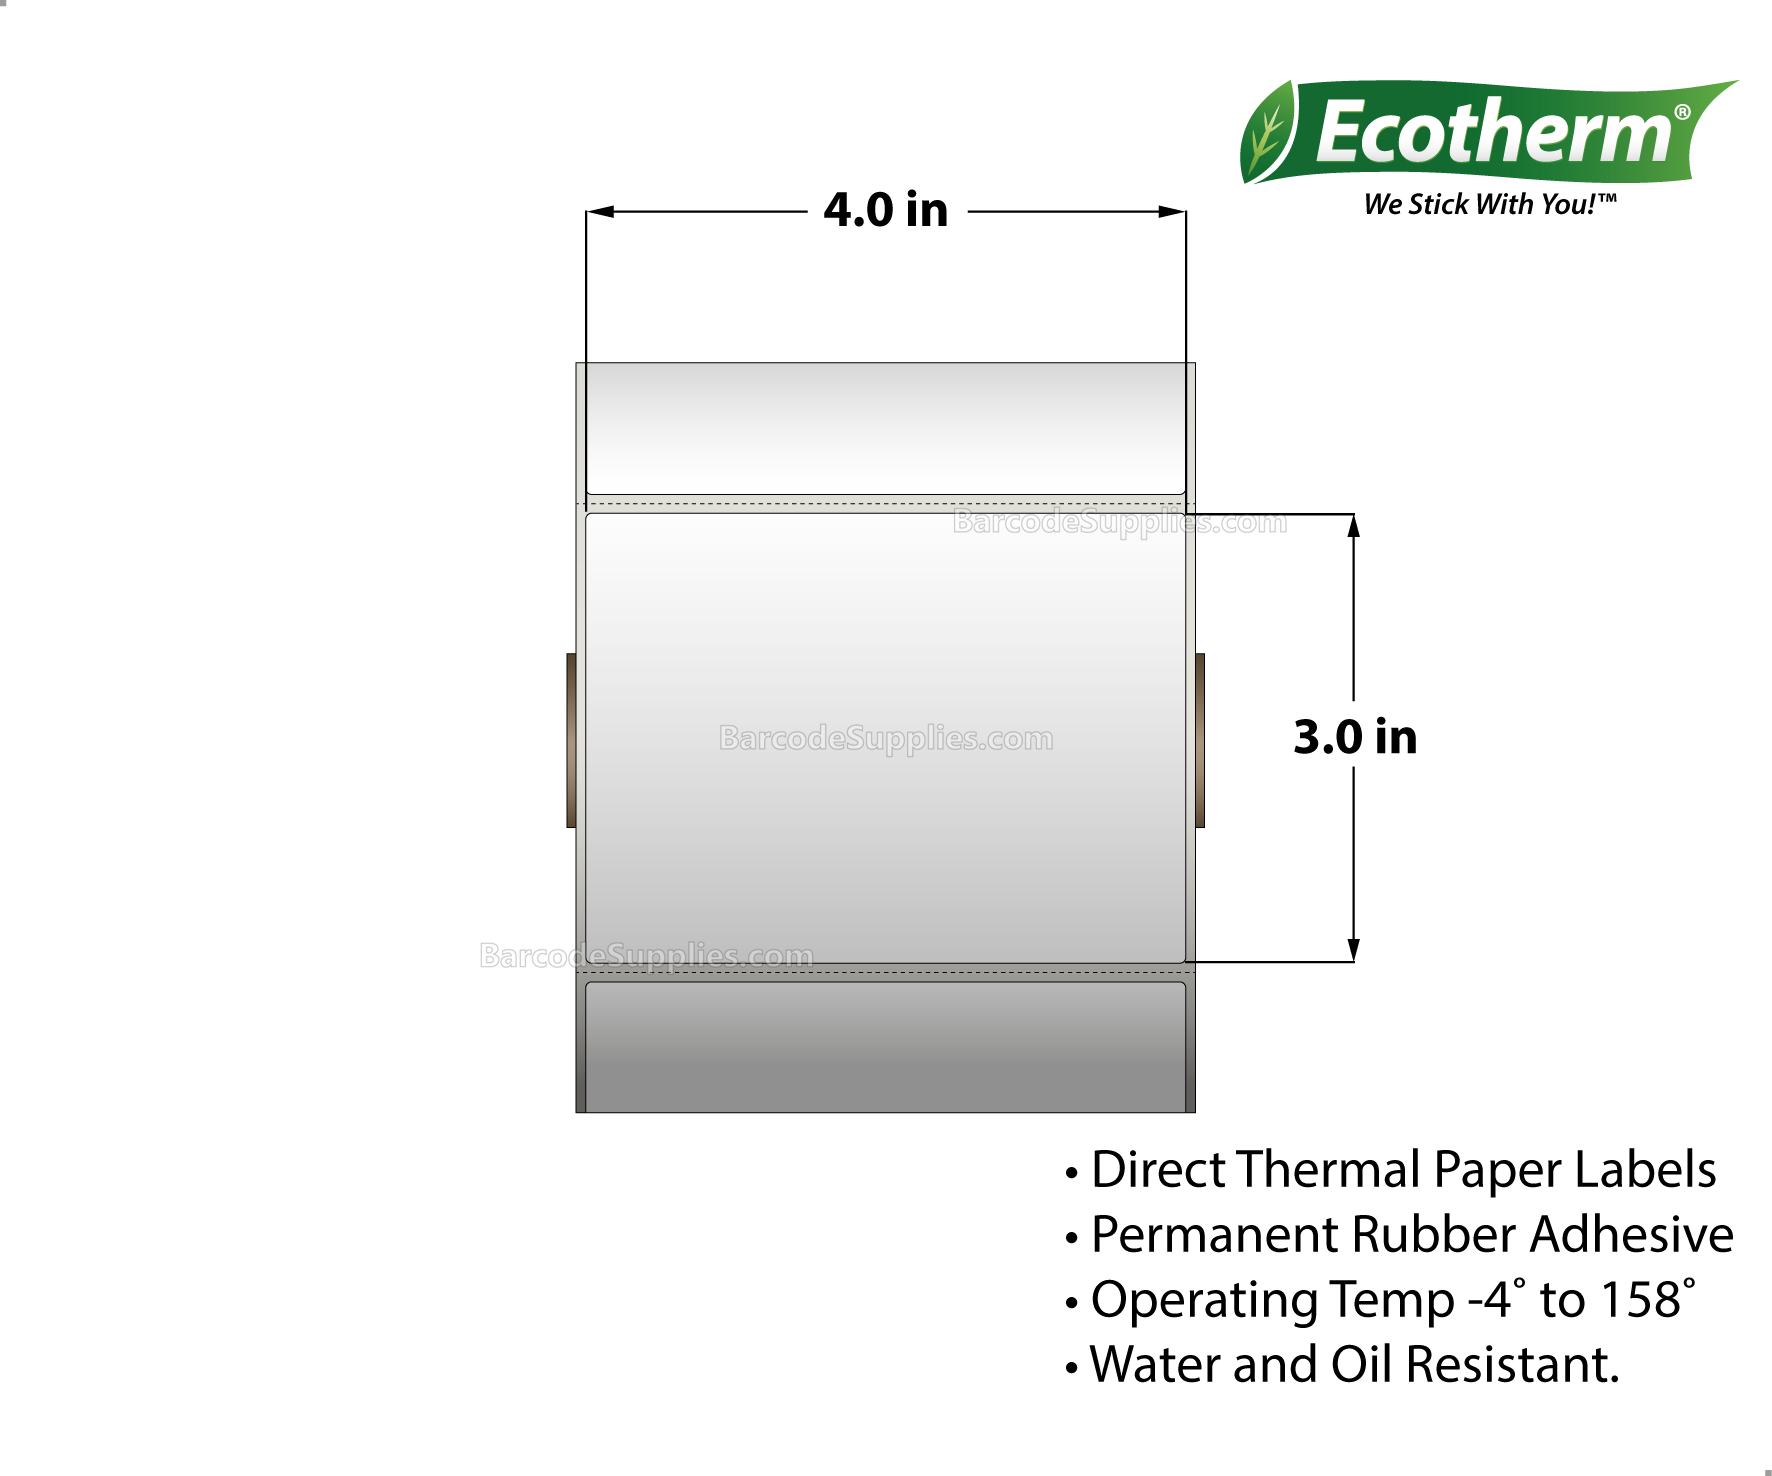 4 x 3 Direct Thermal White Labels With Rubber Adhesive - Perforated - 930 Labels Per Roll - Carton Of 6 Rolls - 5580 Labels Total - MPN: ECOTHERM15151-6